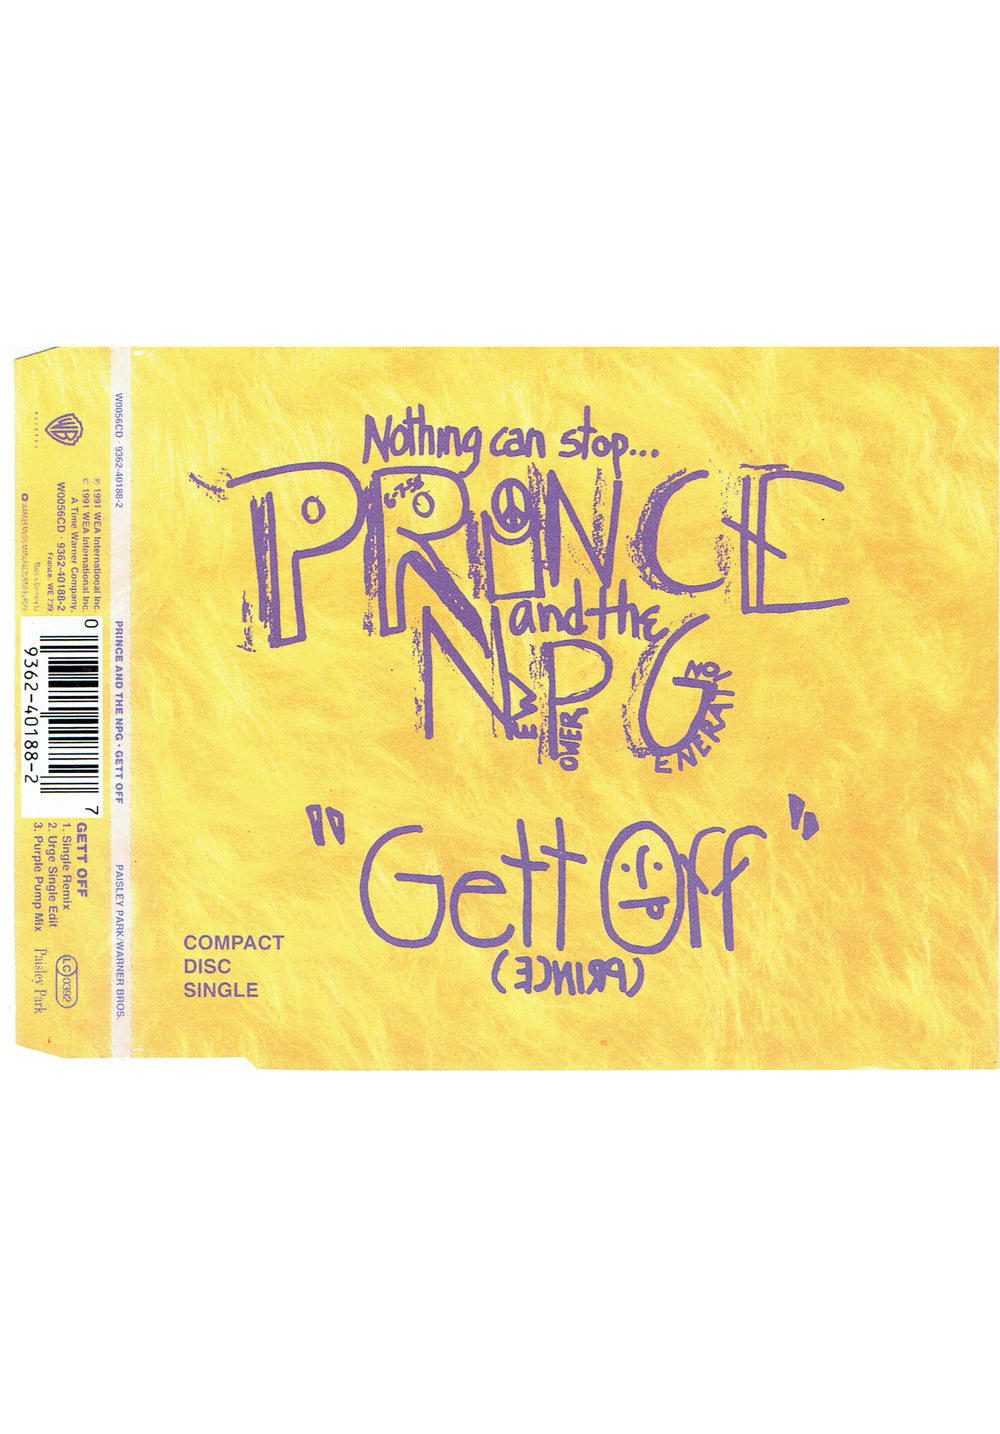 Prince – & The New Power Generation – Gett Off CD Single Europe Preloved: 1991